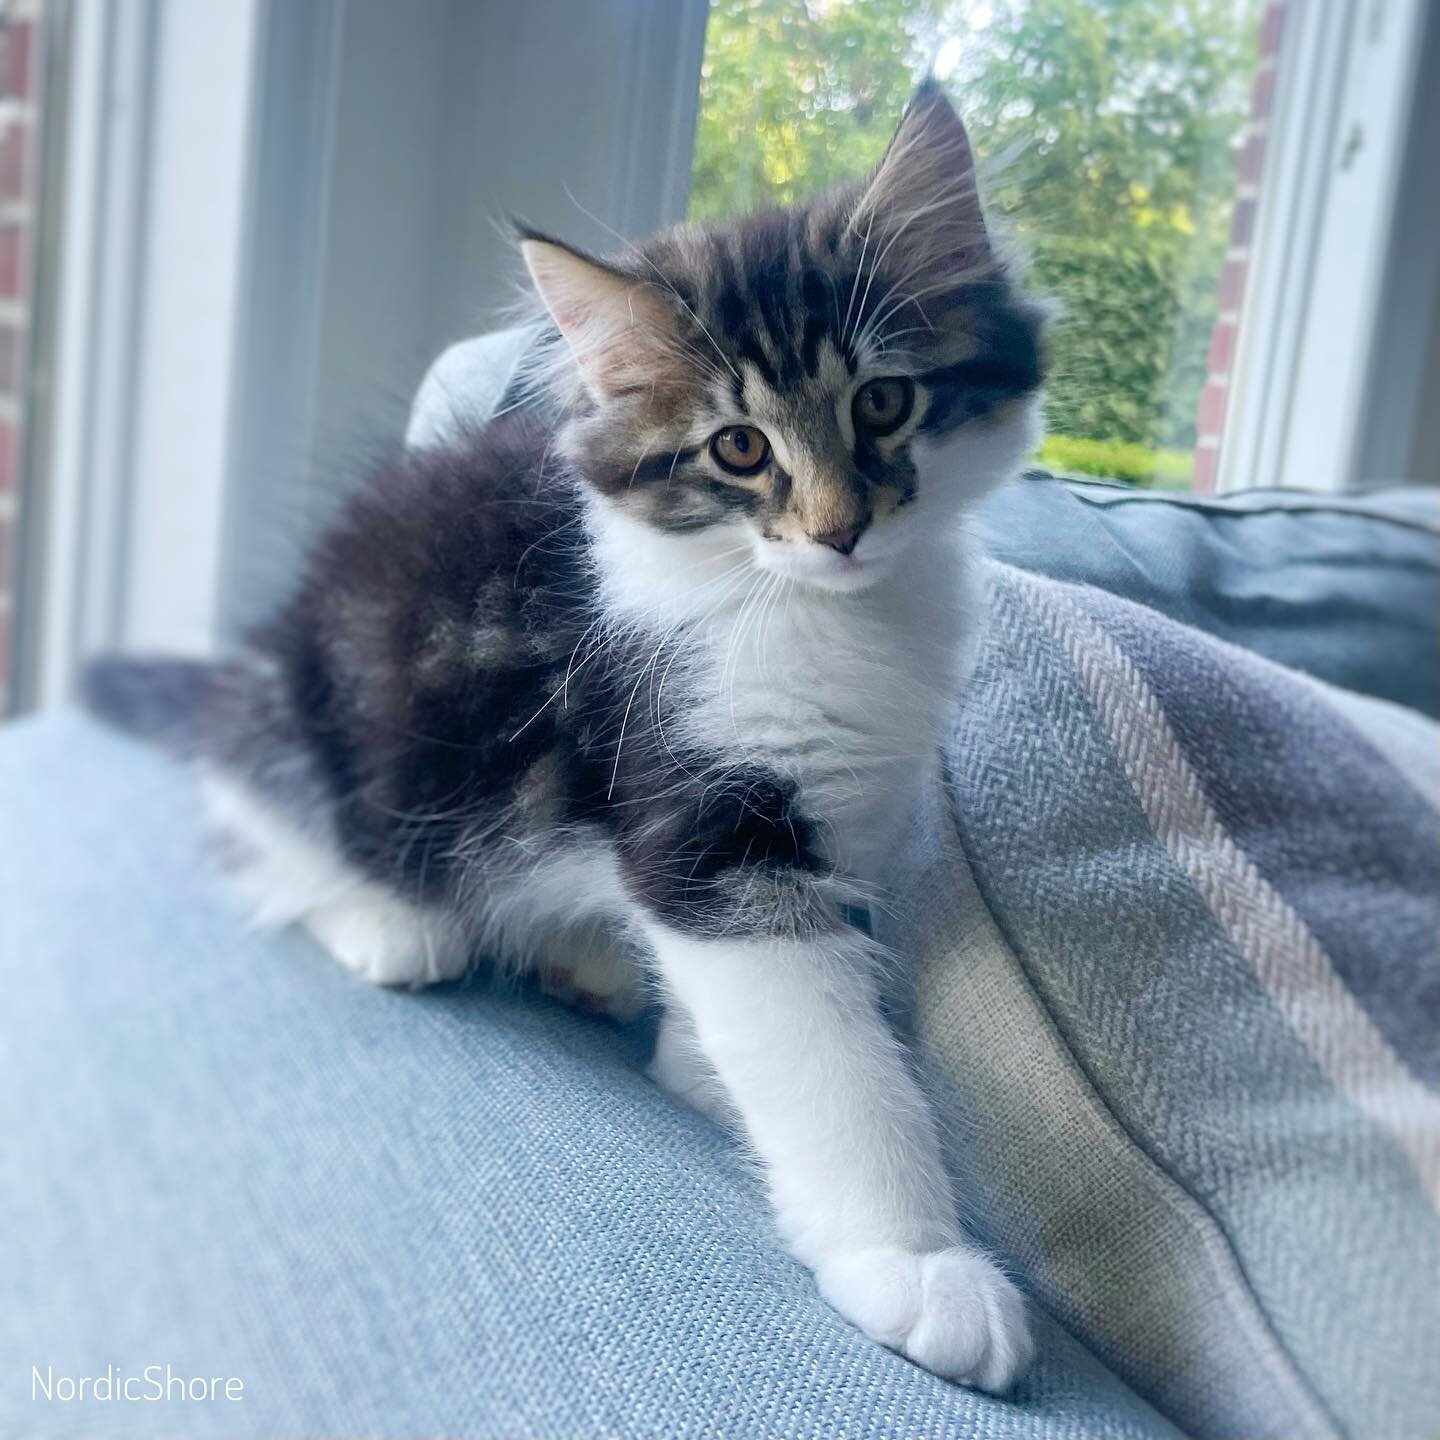 We have loved having you, sweet kitten! And we know you&rsquo;ll love your forever home! 💕🐾💕🐾
.
.
#Norwegianforestcats #norwegianforestcat #norwegianforestkittens #norwegianforestkitten